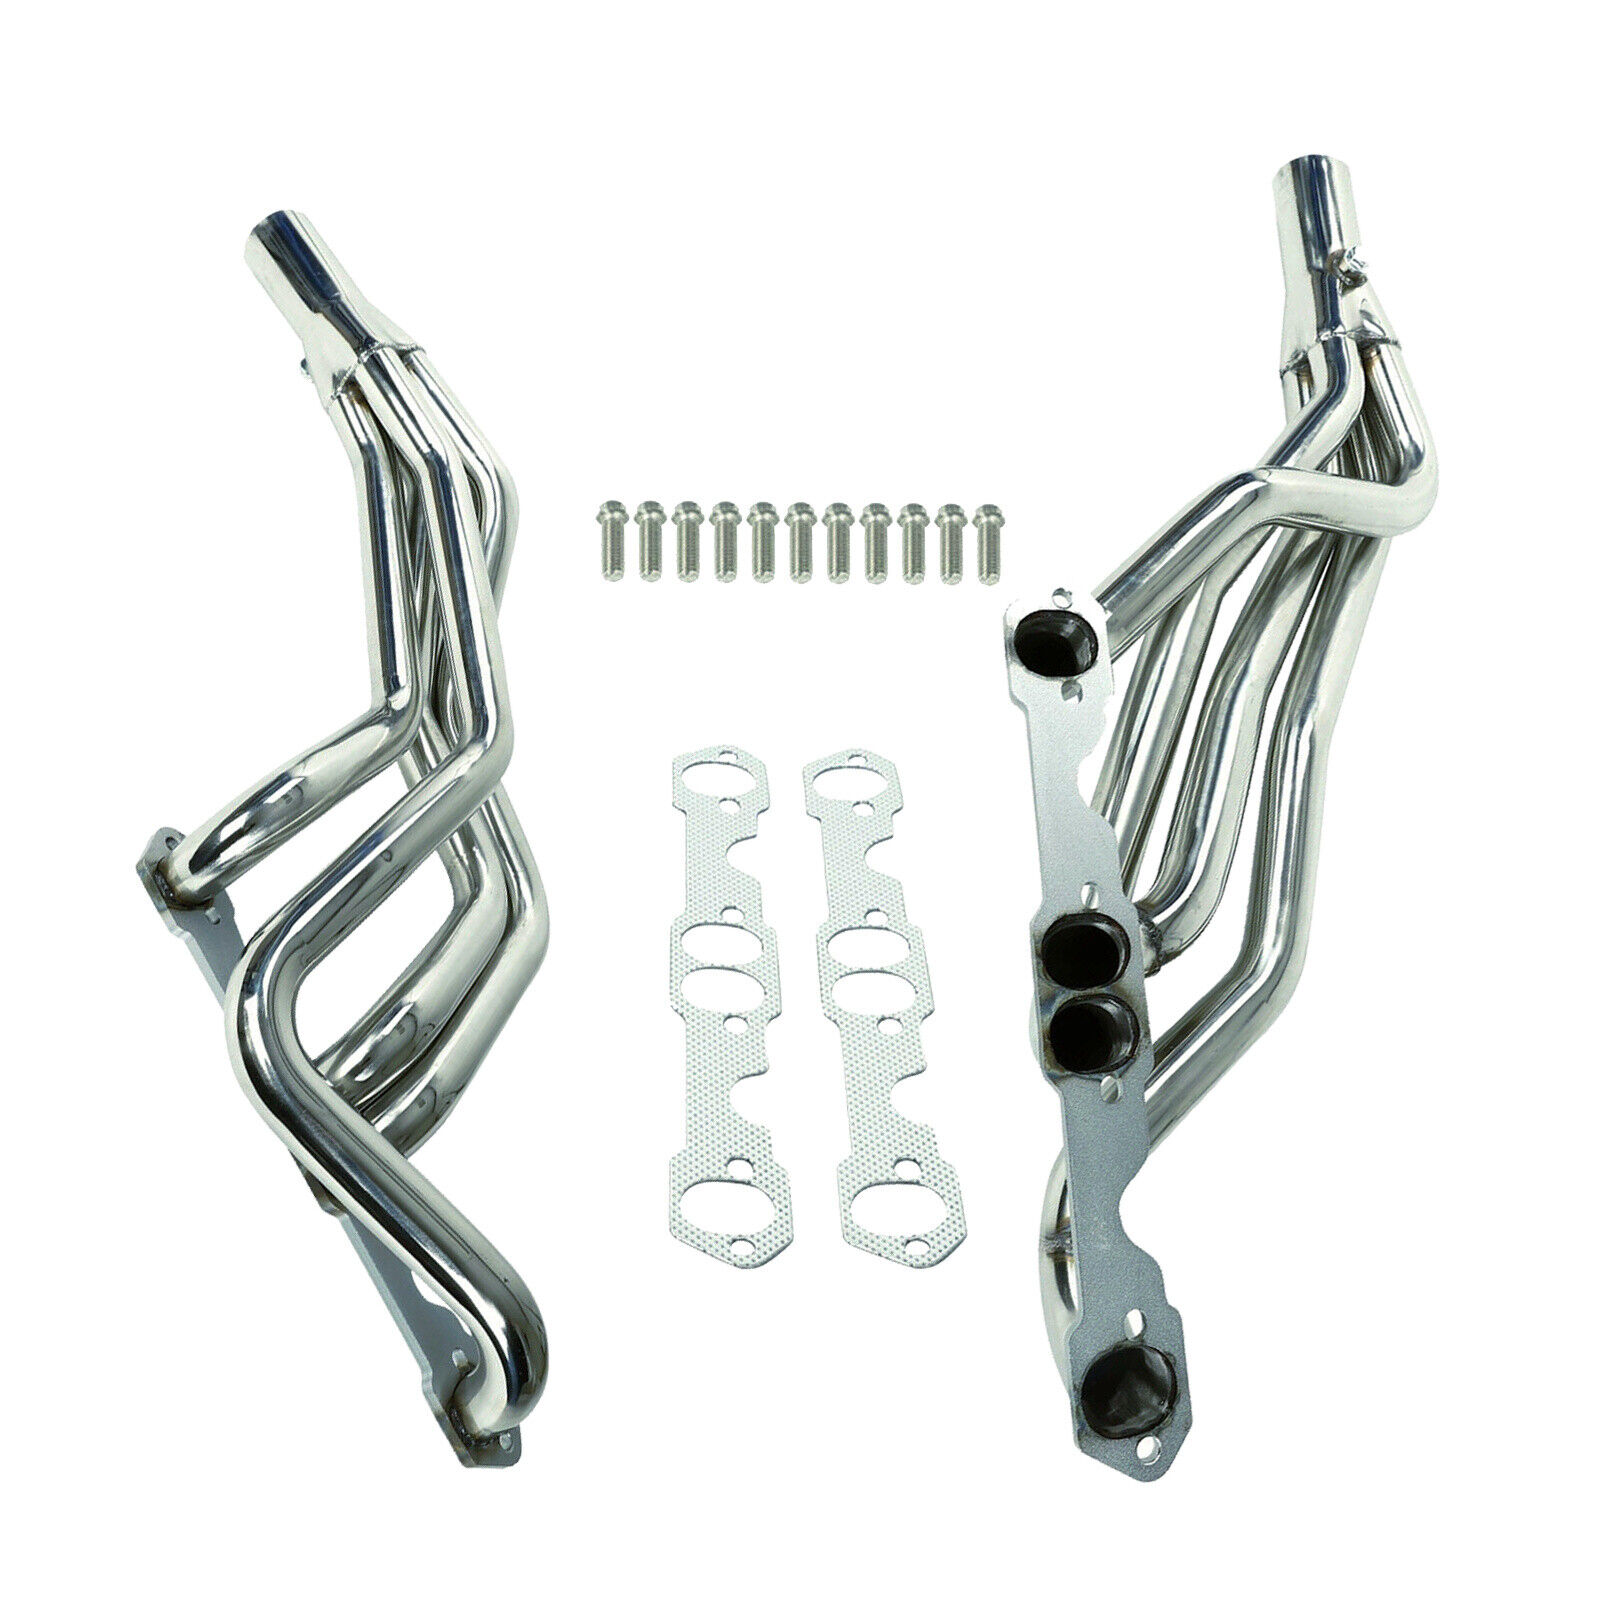 New Stainless Steel Manifold Headers For 93-97 Chevy Camaro/Firebird 5.7L LT1 YB